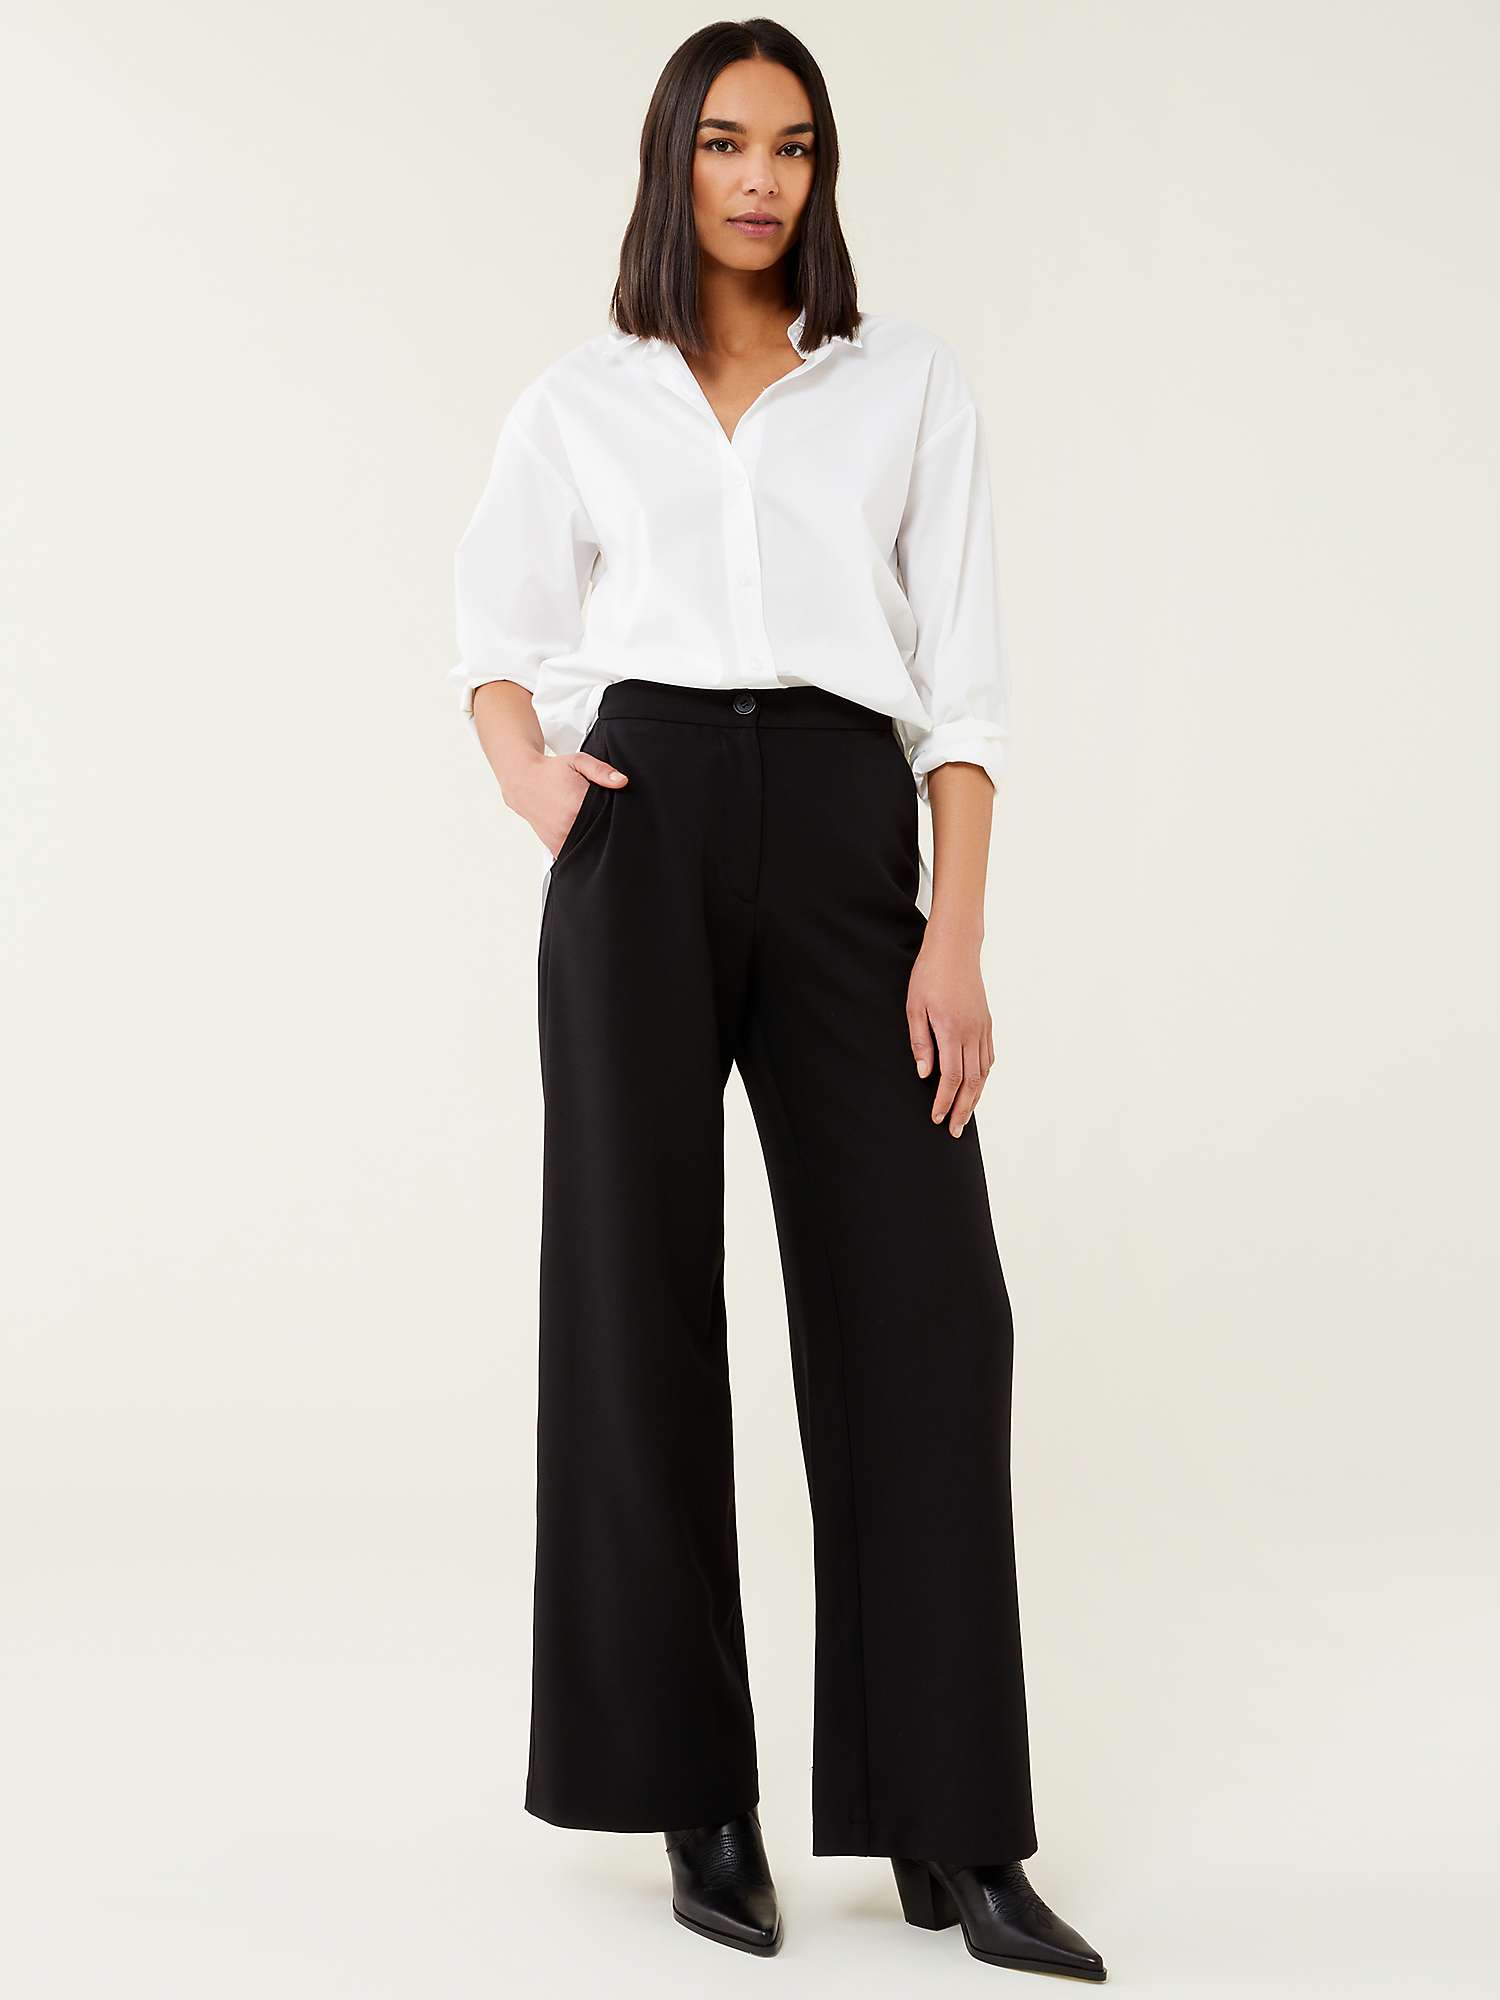 Finery Kaden Tailored Trousers, Black at John Lewis & Partners